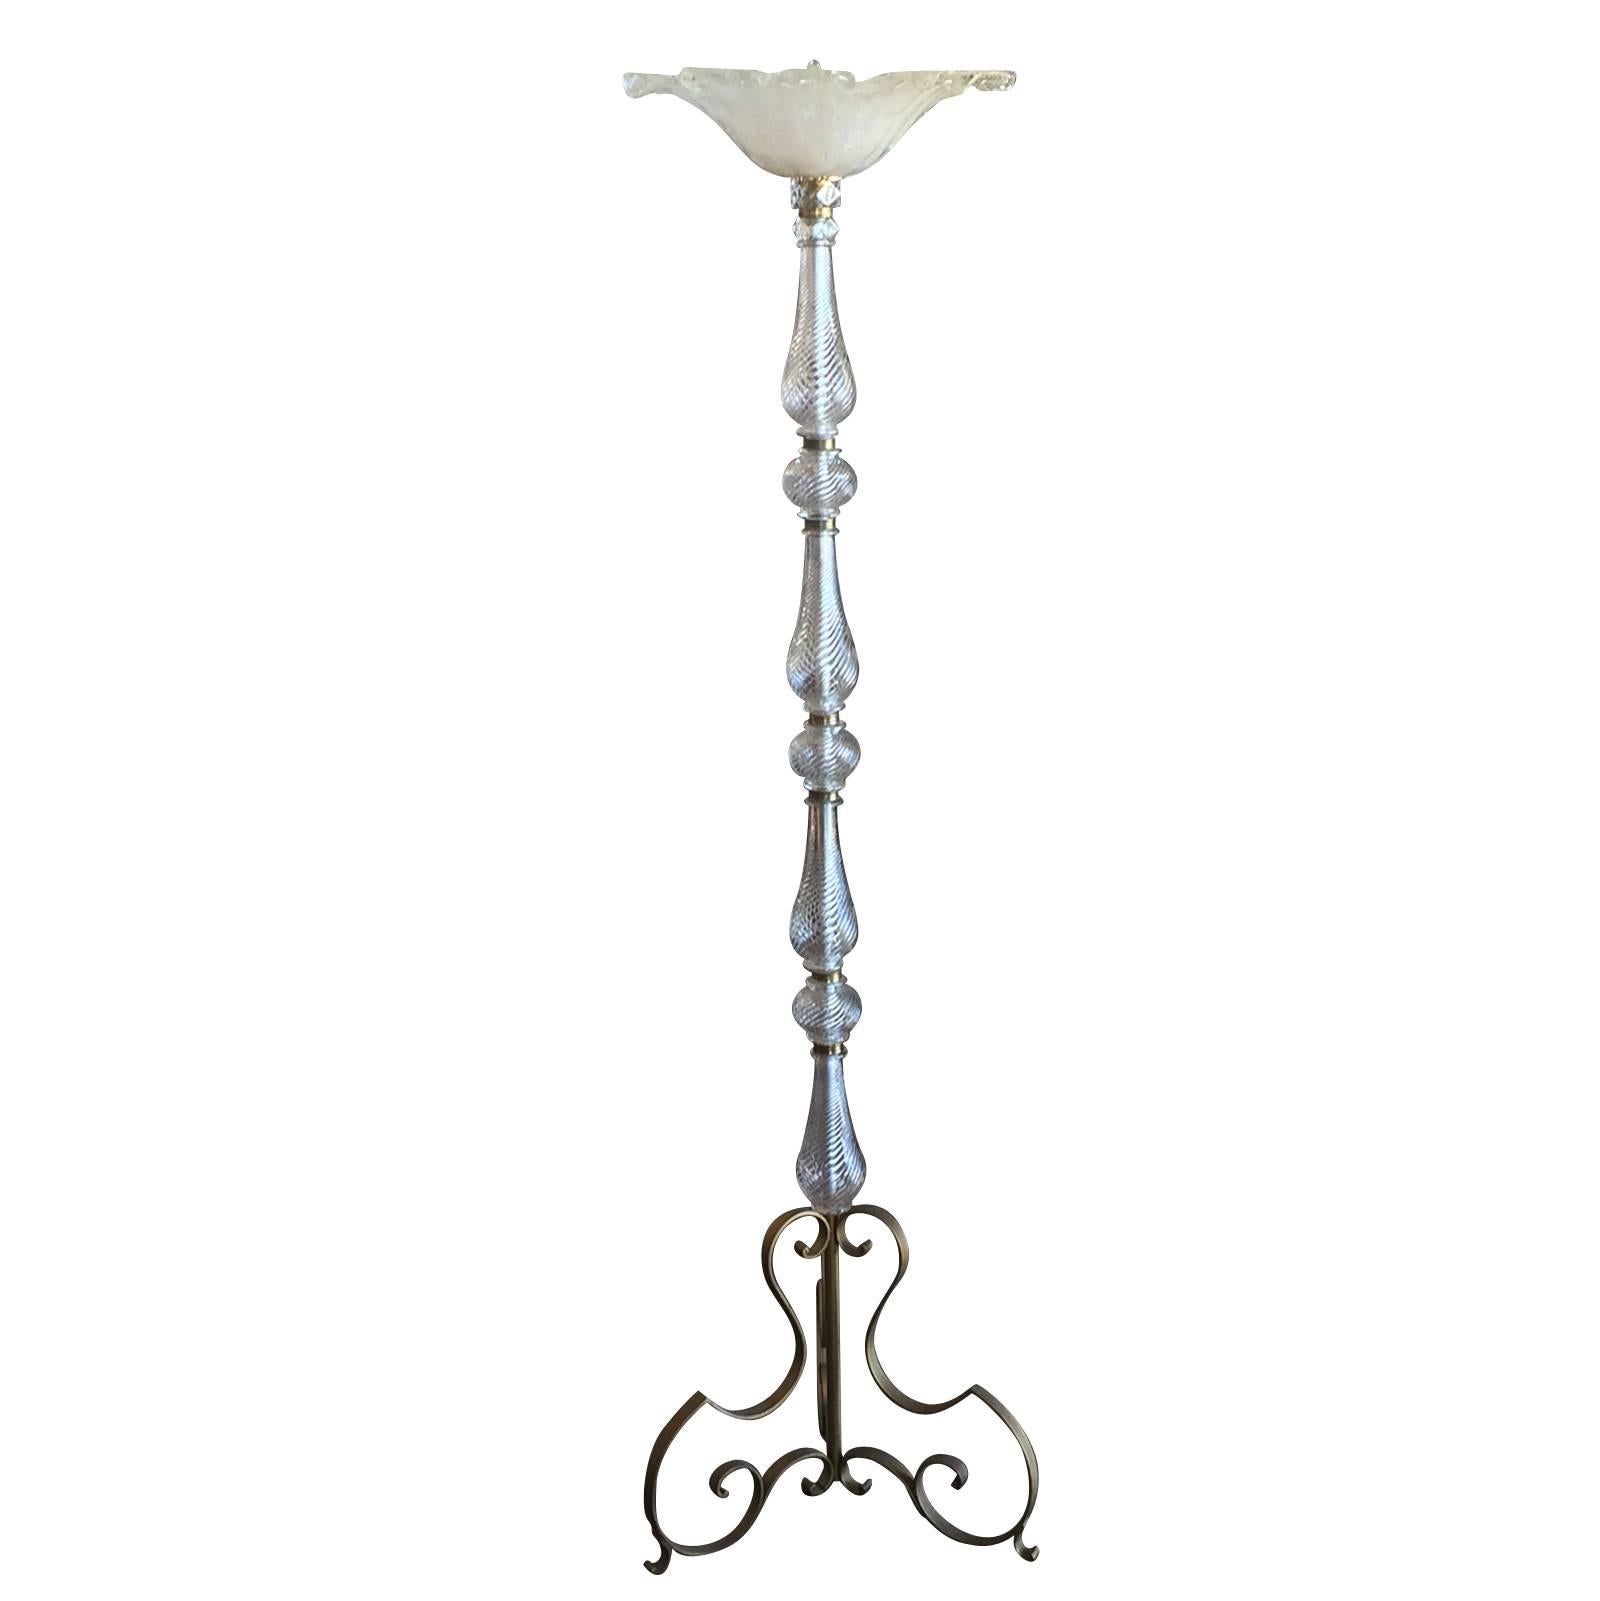 Rare, art deco French, Murano standard floor lamp. Spectacular snow and crystallised stripes Murano shade, above varies, geometric, swirled shaped glass supports surrounding bronzed/gilt tube, with intricate curled satin gilt, three legged,